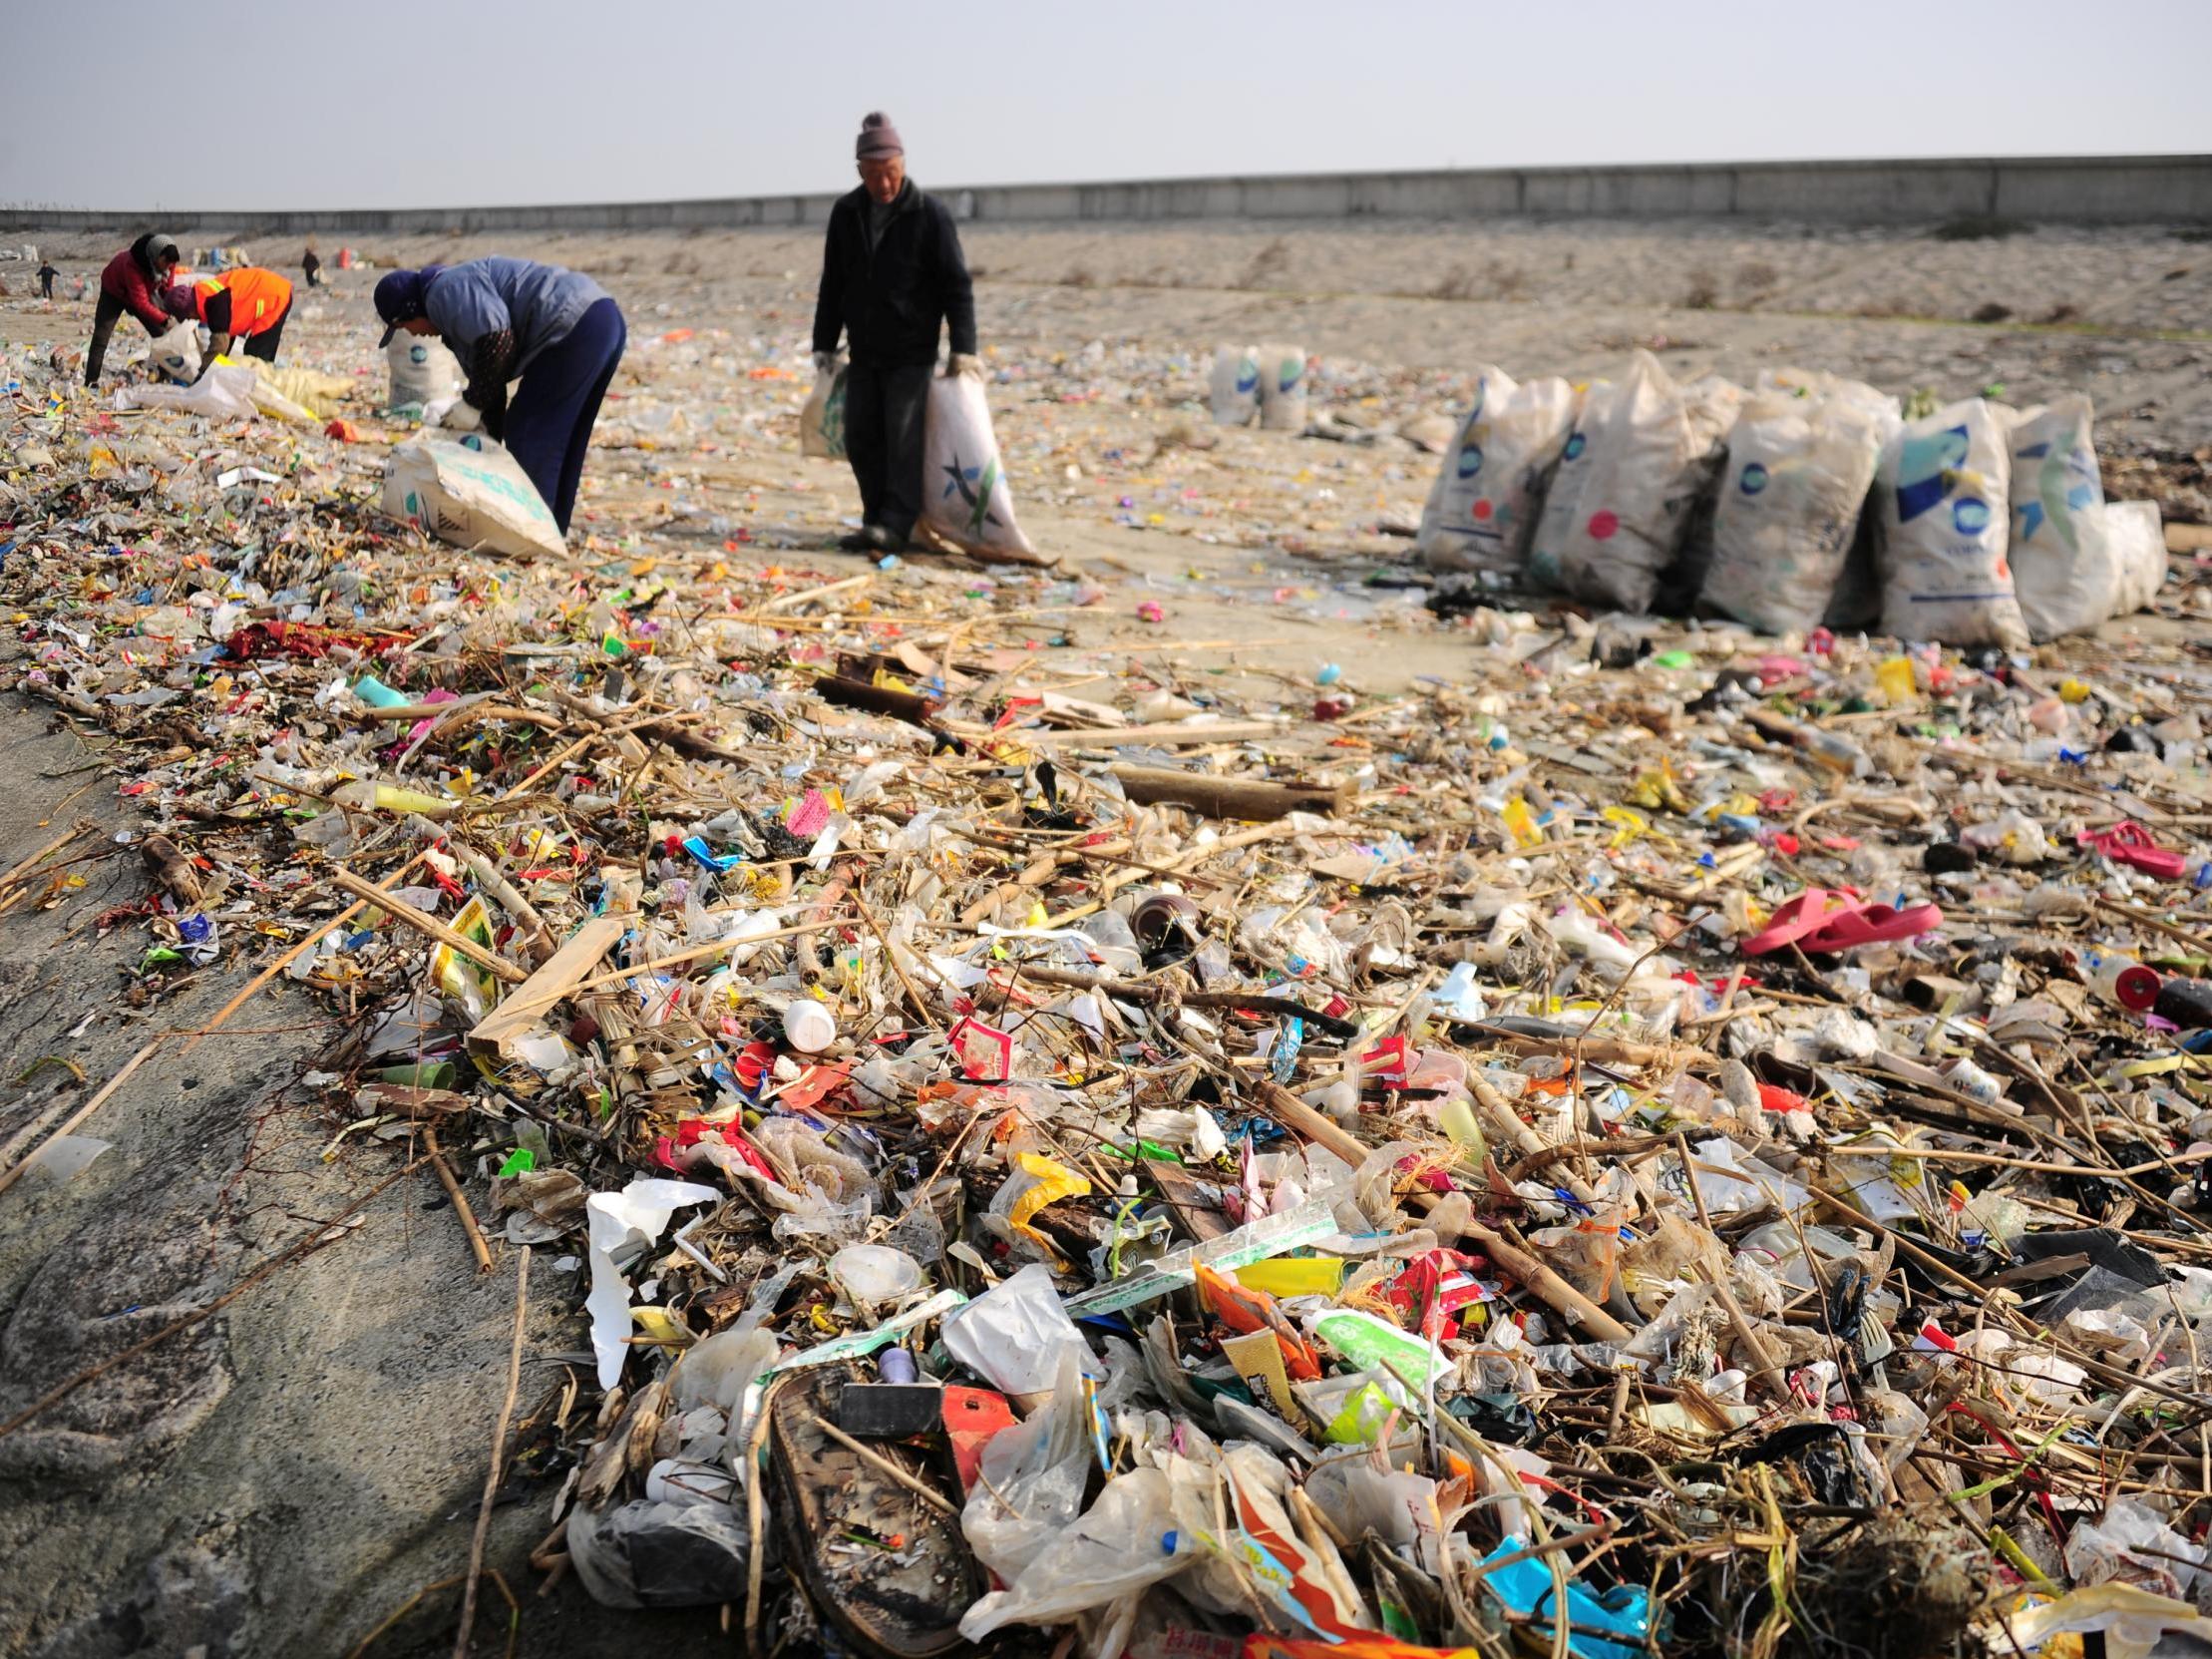 Workers clear rubbish from the bank of Yangtze river in Taicang, in China's Jiangsu province